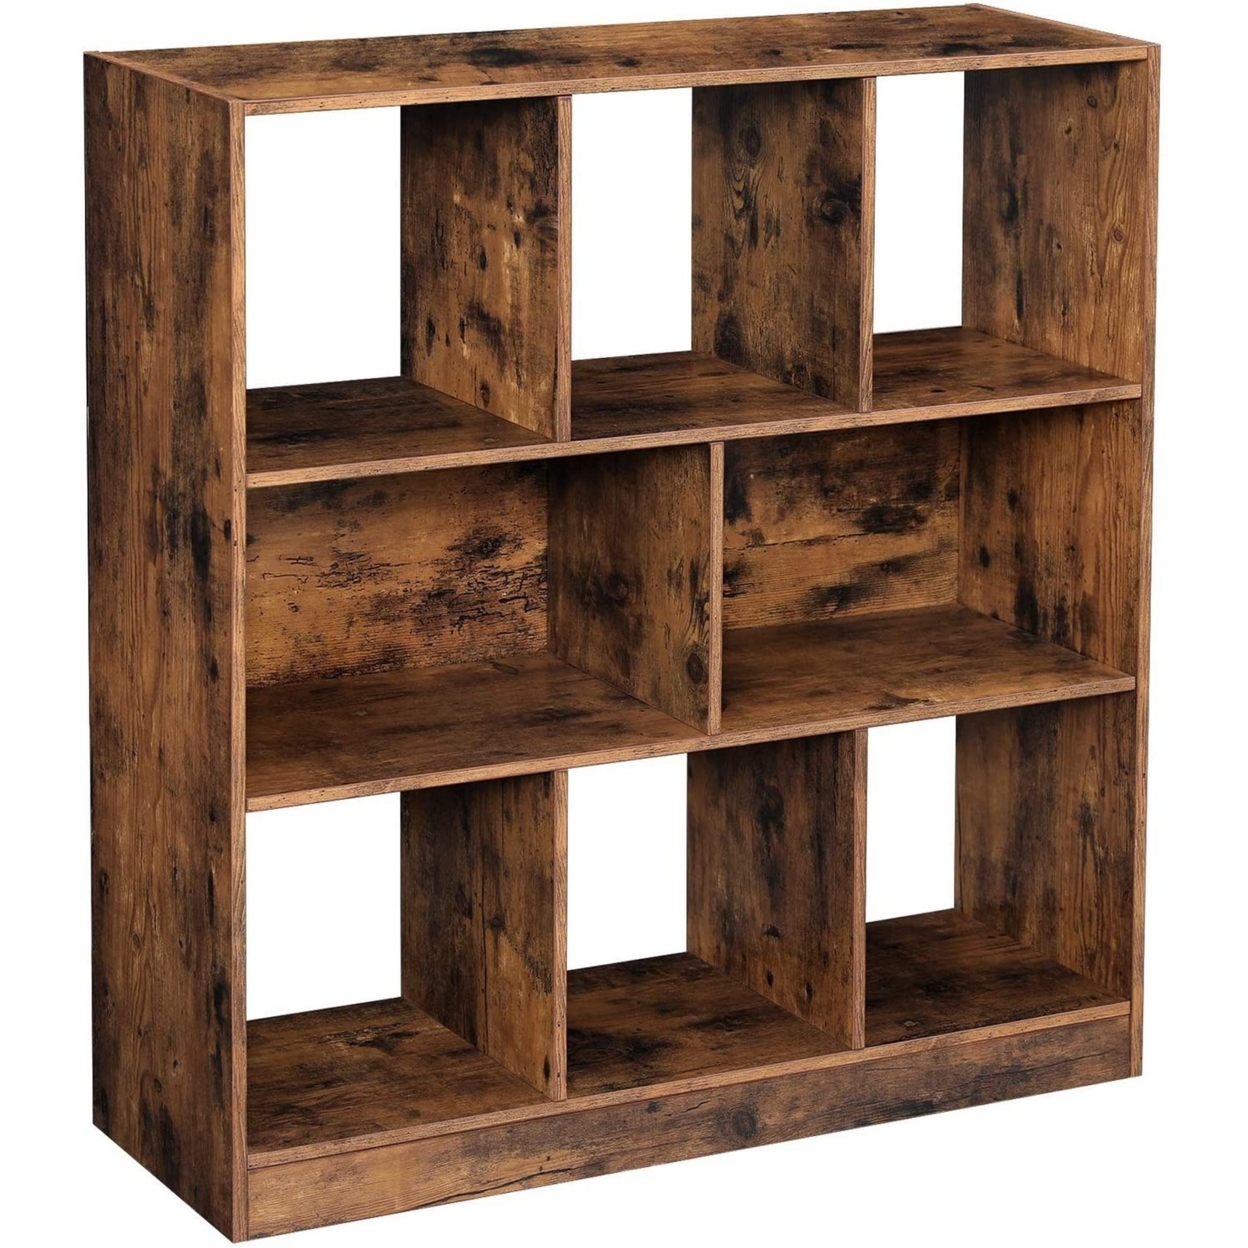 6 Open Shelves Wooden Bookcase With 2 Compartments, Rustic Brown- Saltoro Sherpi